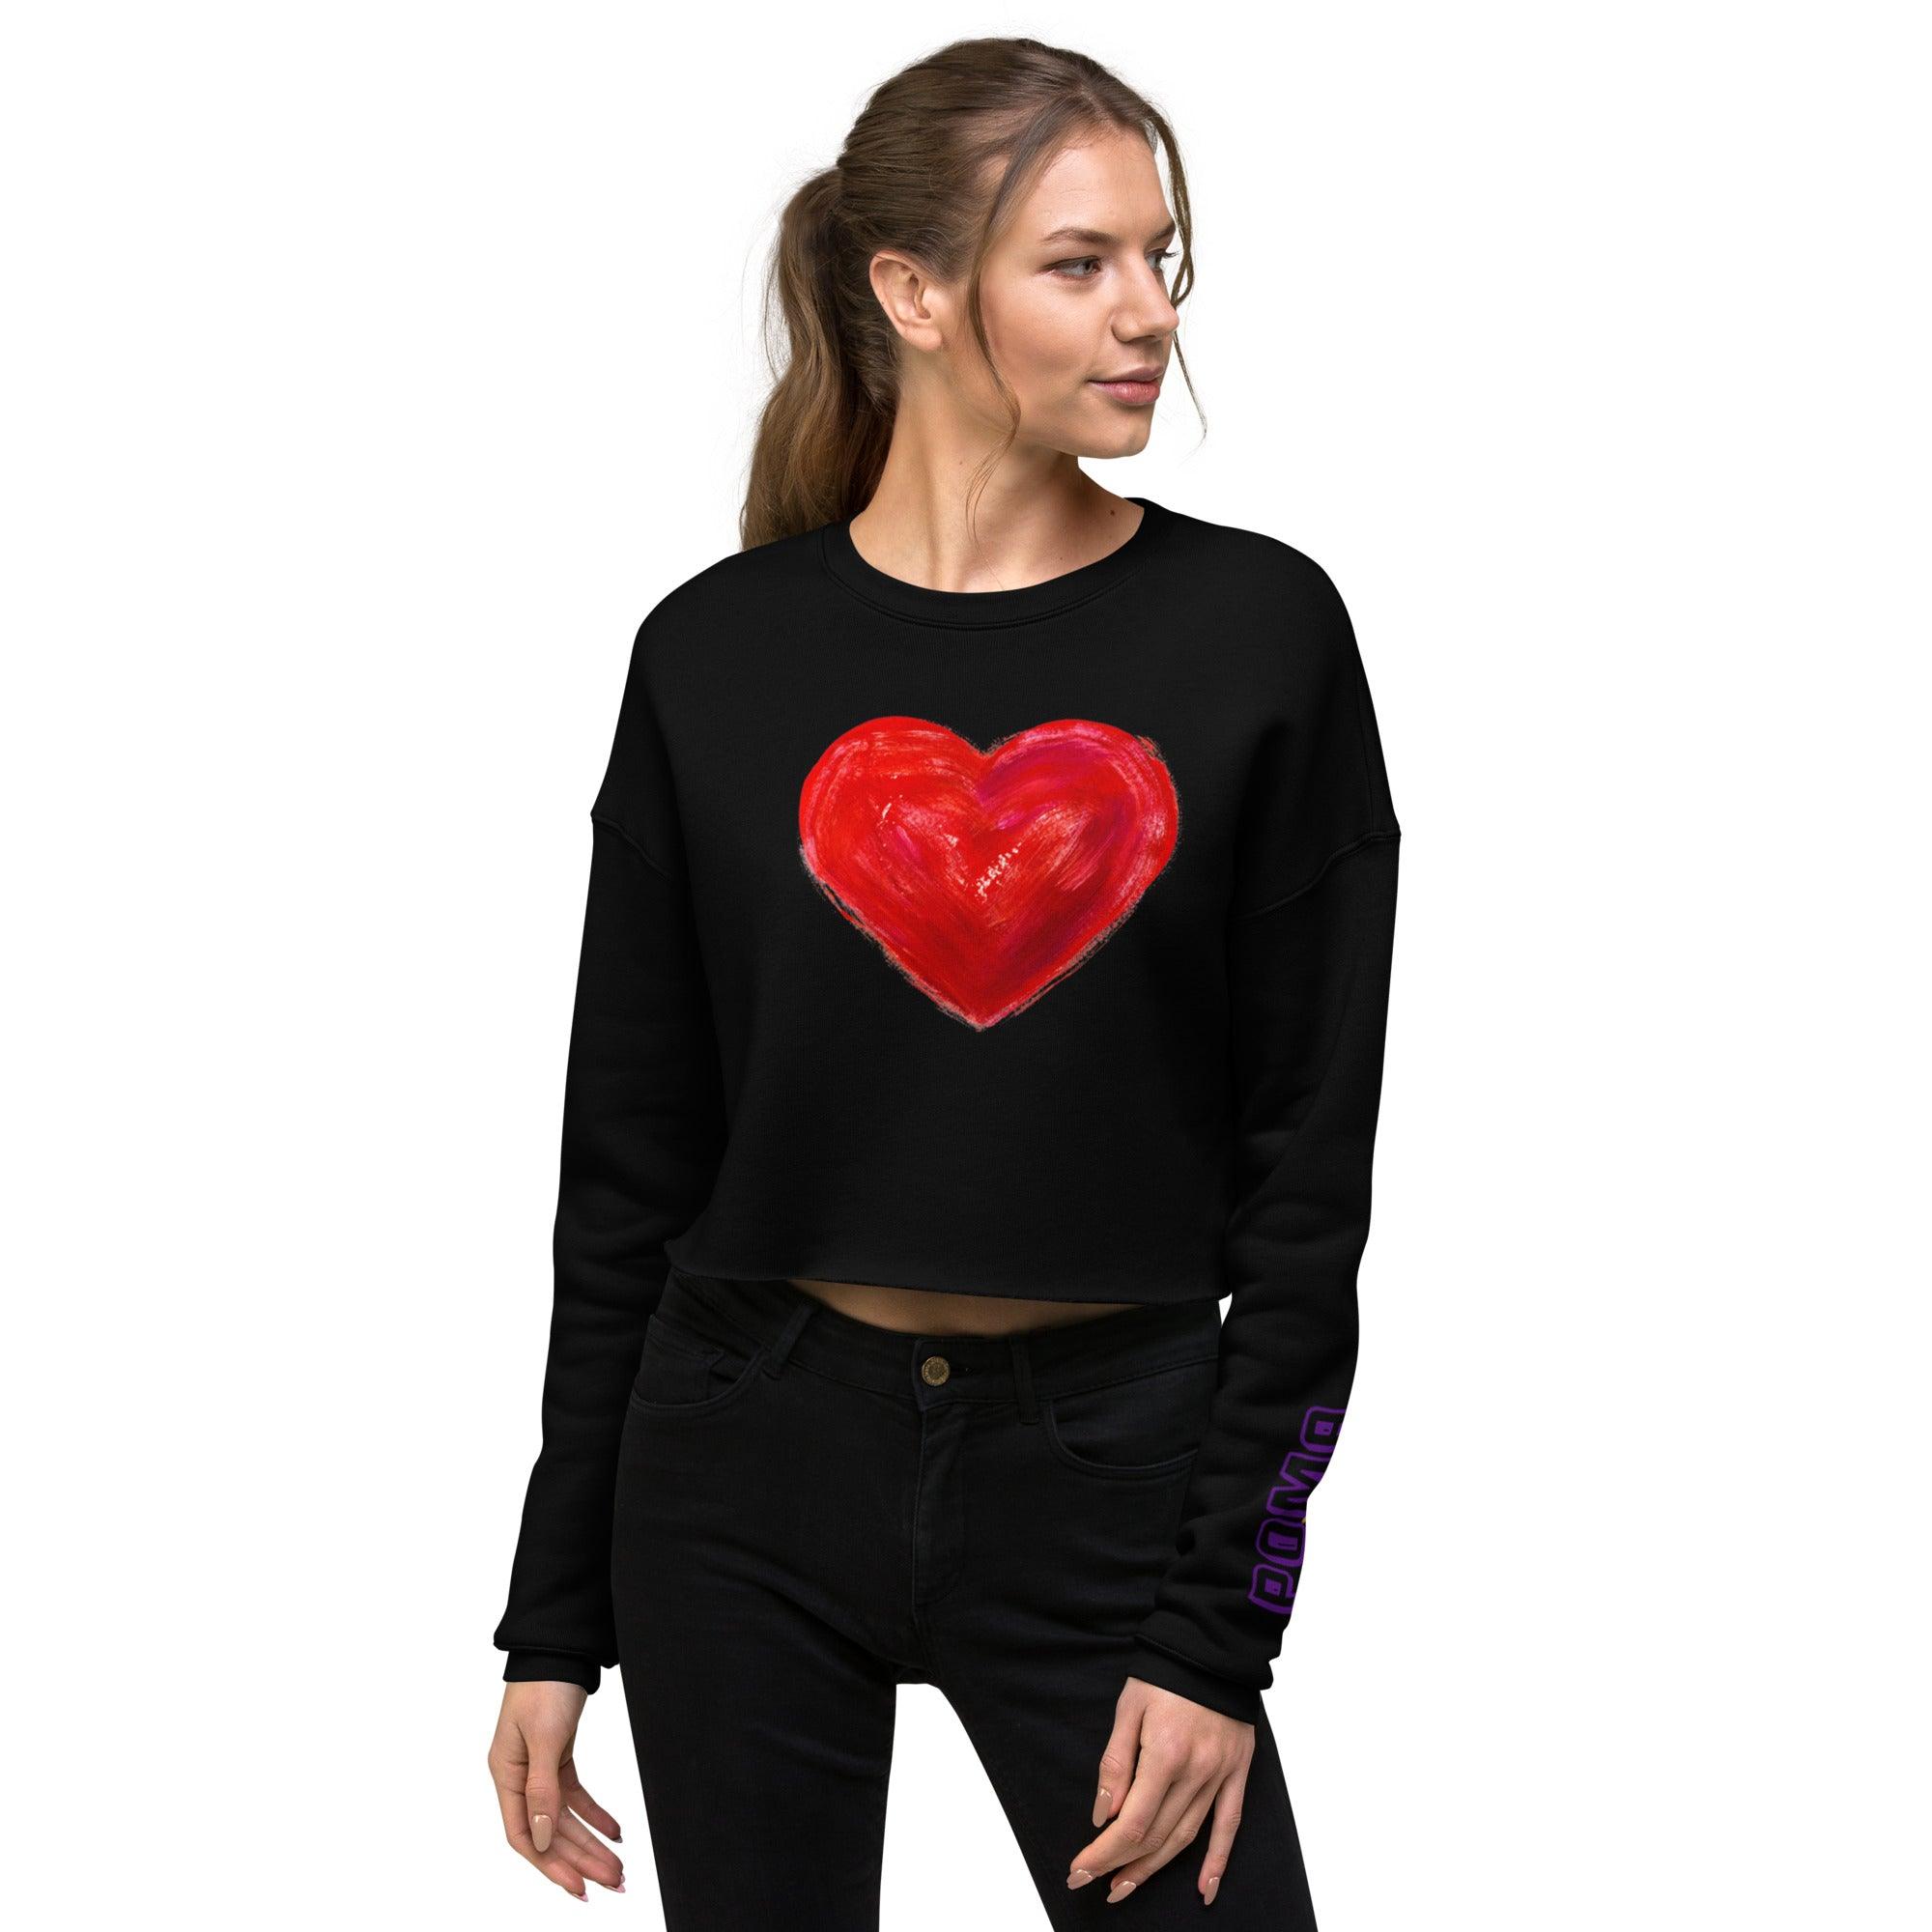 'Bright Red Heart' Cropped Sweatshirt - POMA Graphics